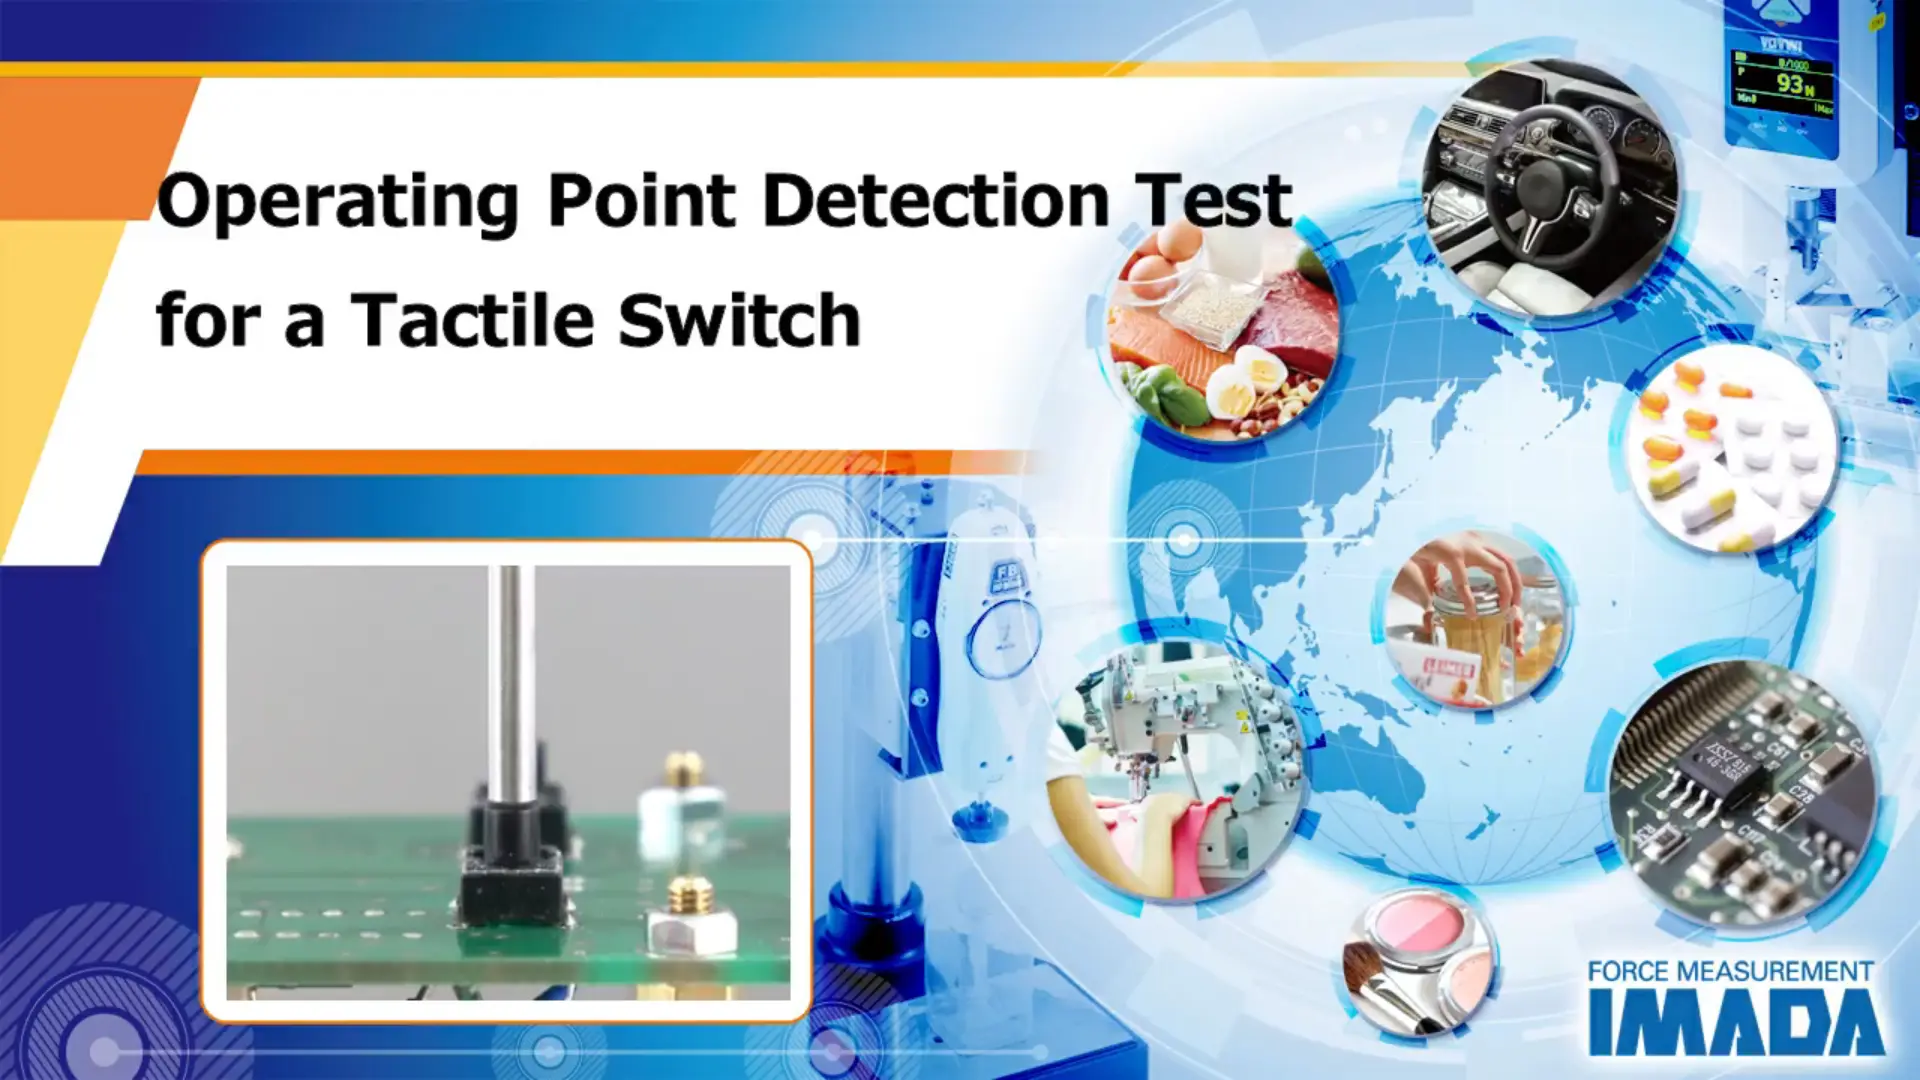 Operating Point Detection Test for a Tactile Switch